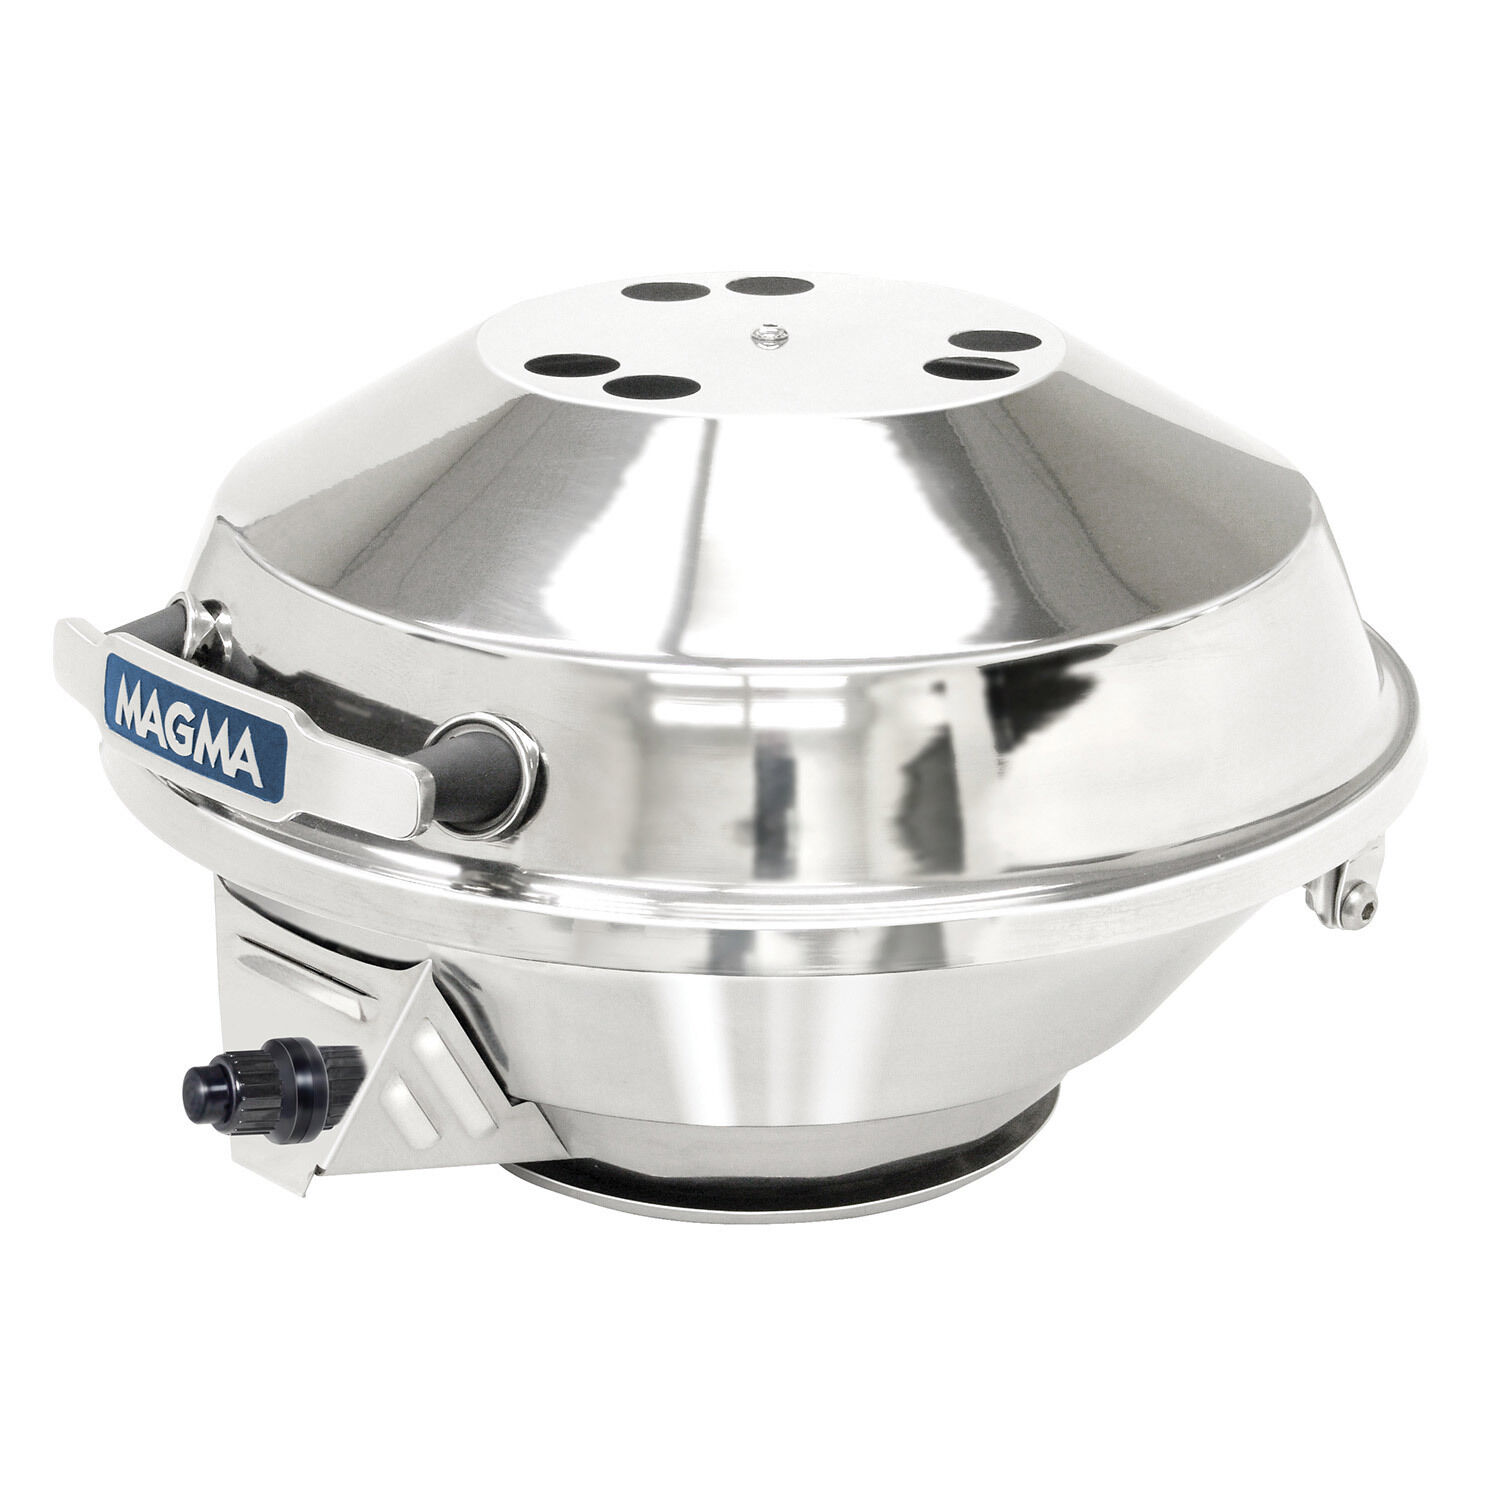 Magma Marine Stainless Steel Kettle 2 Charcoal Grill for sale online 